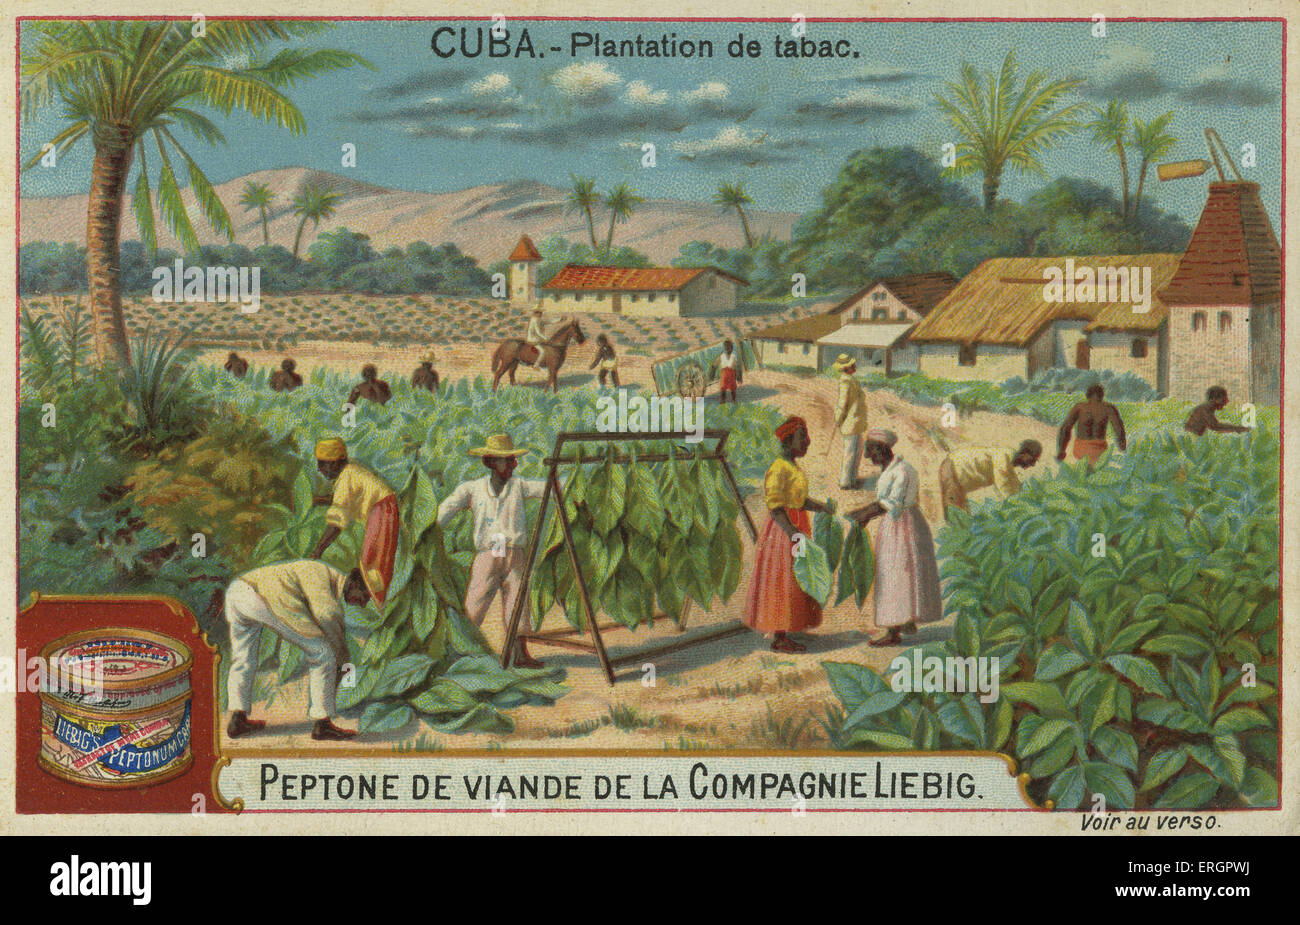 Tobacco Production Drawings